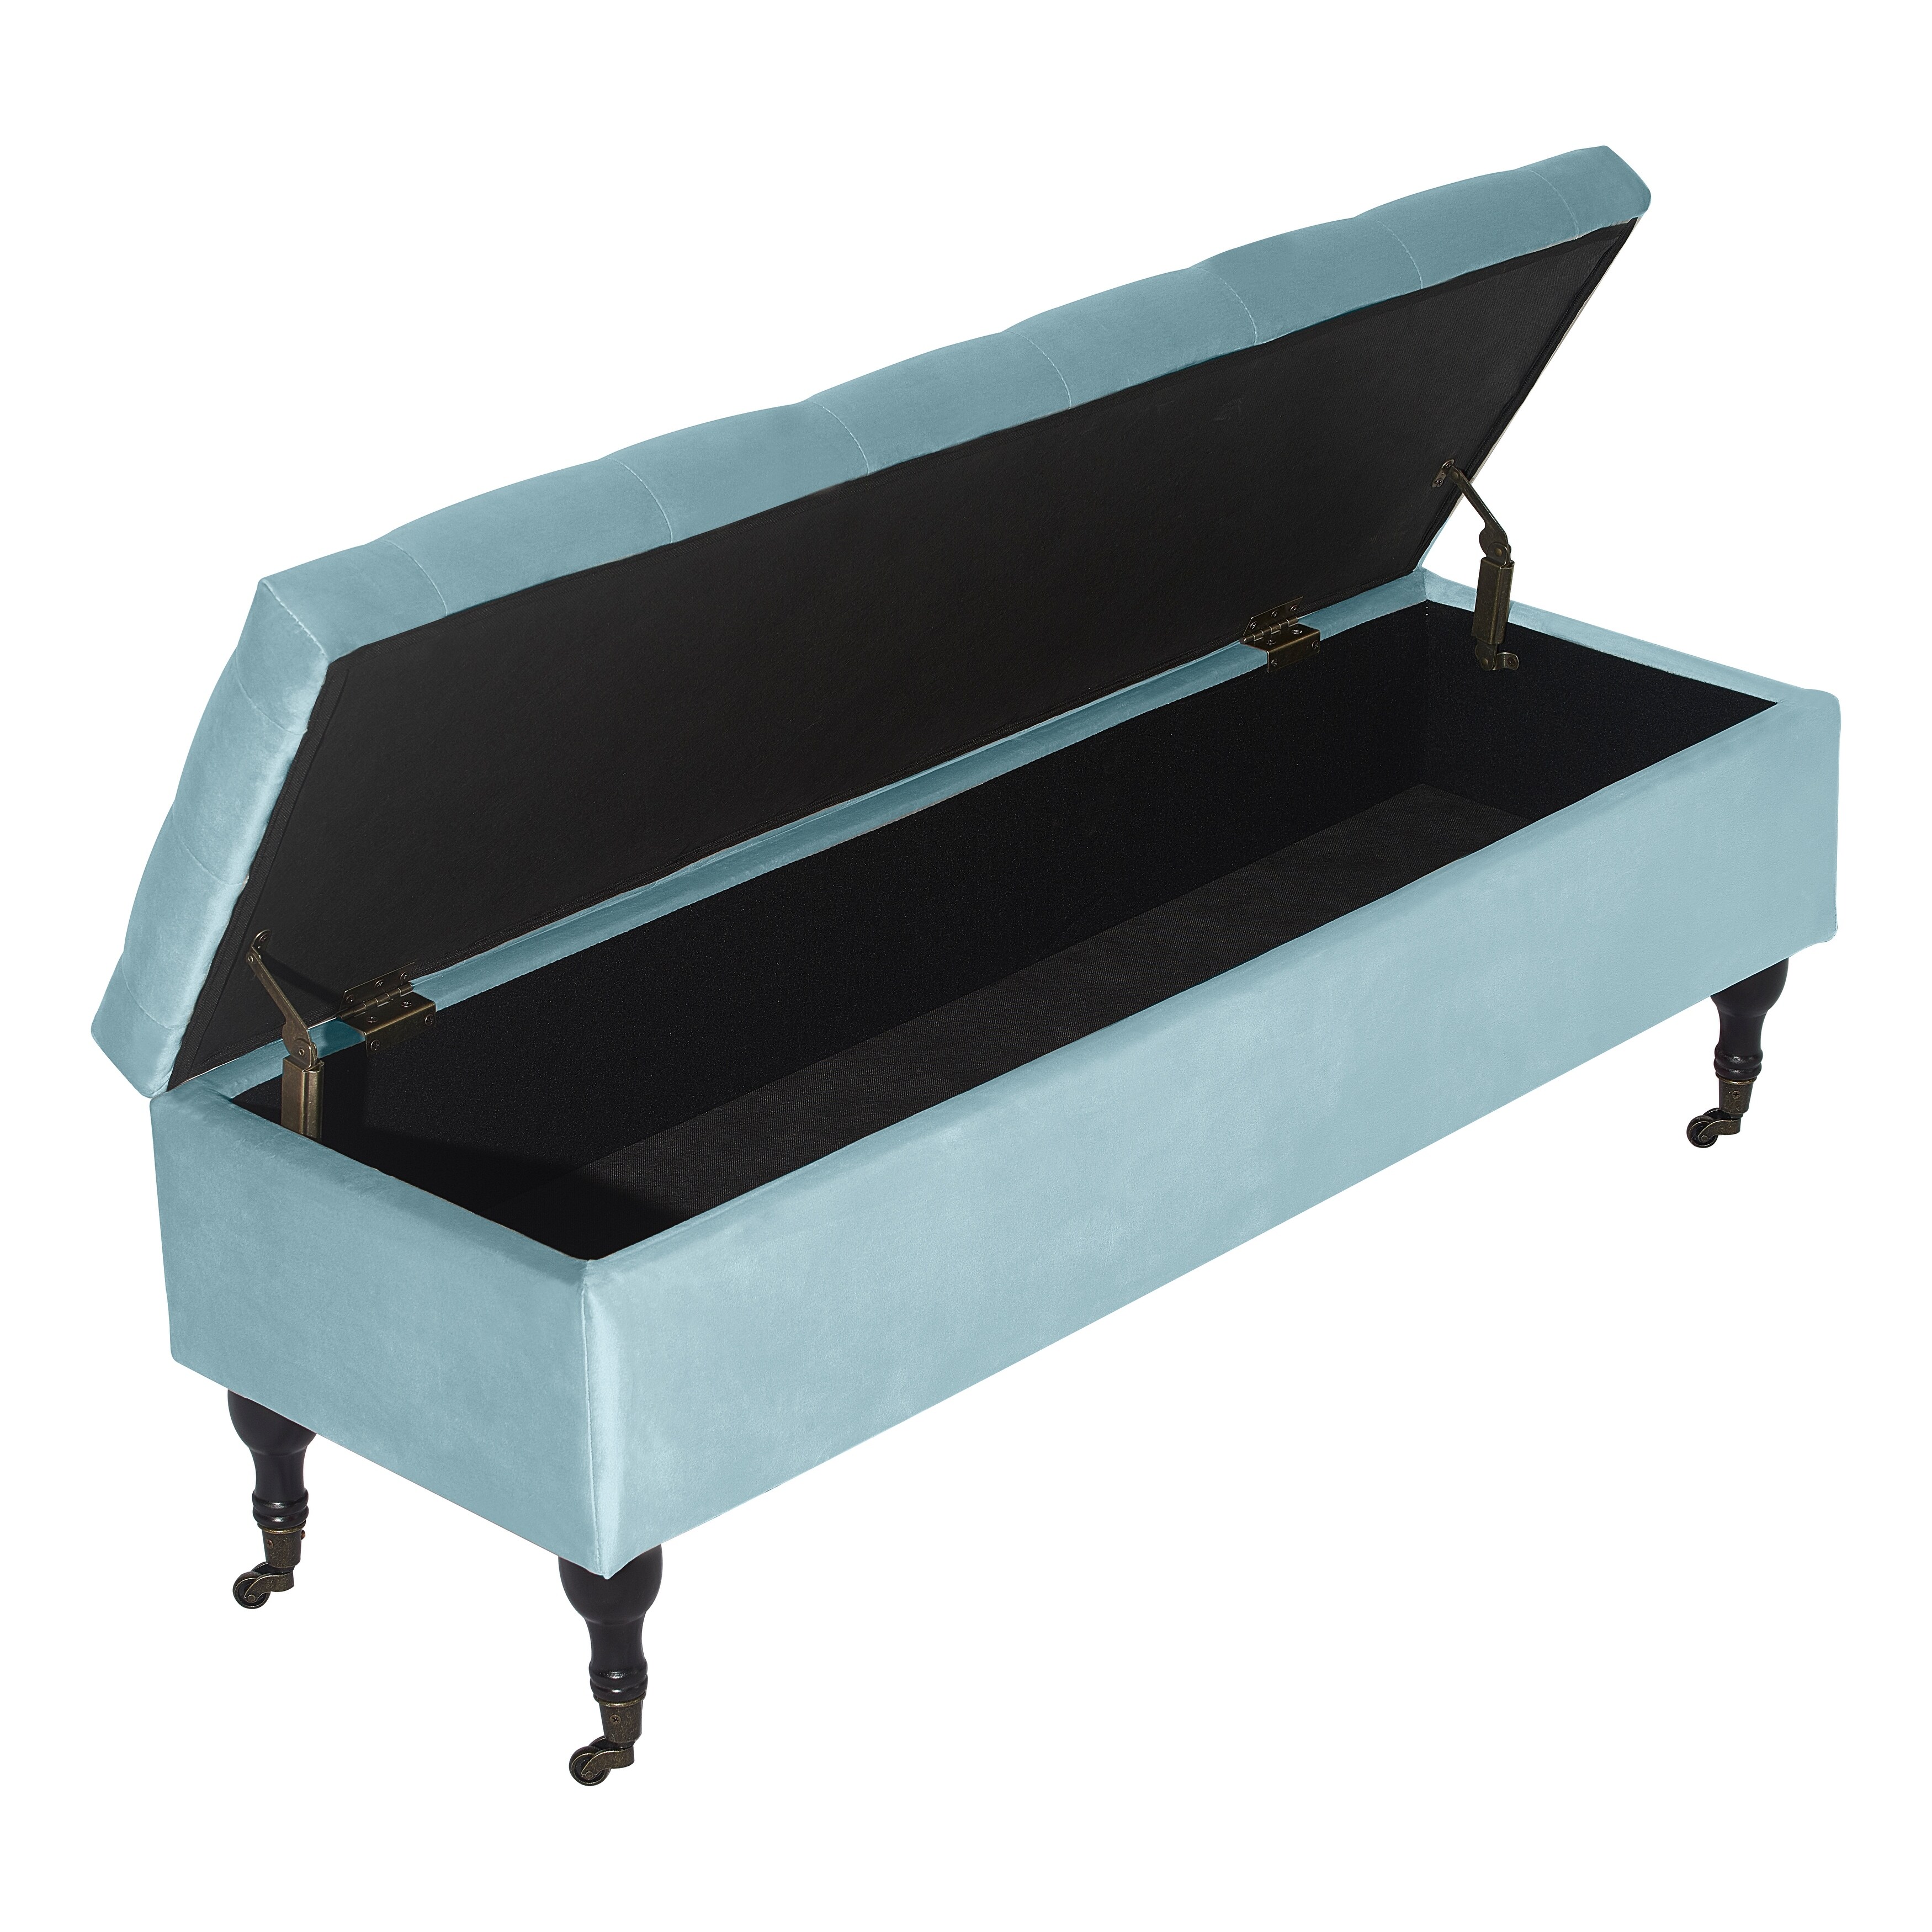 Elle Decor Collette Tufted Storage Bench in French Linen 